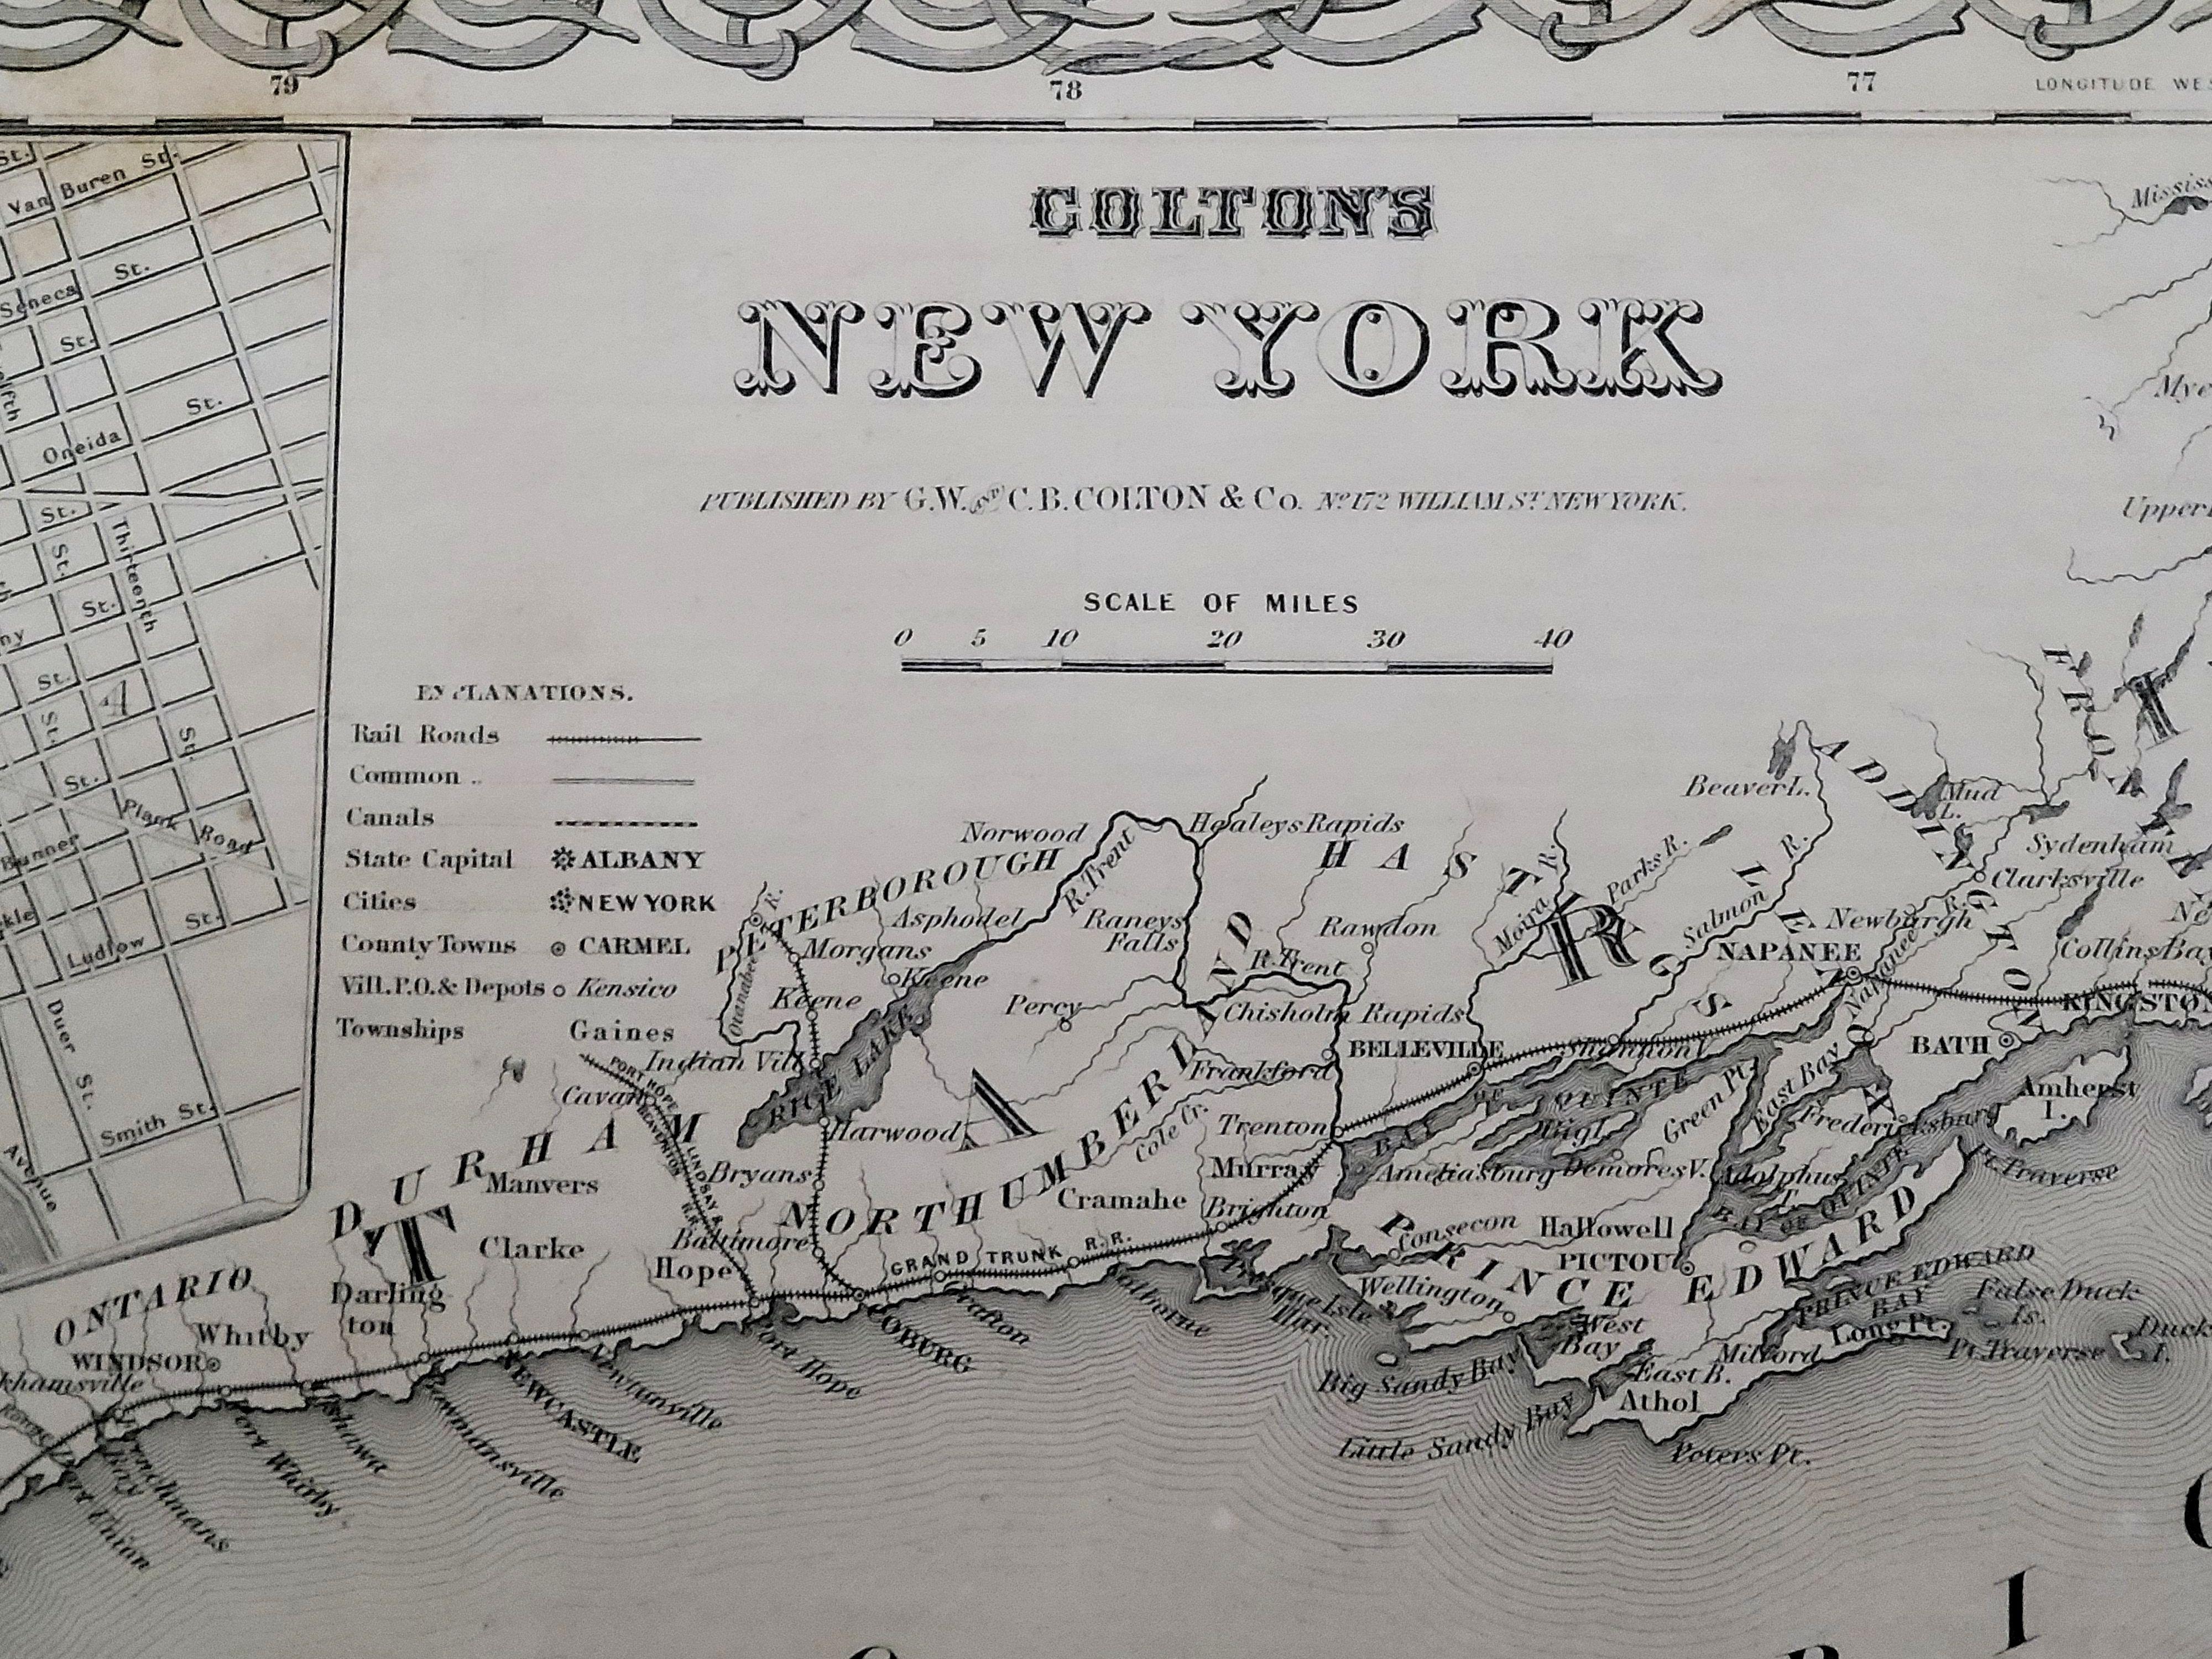 Unknown 1858 Colton's Map of New York, Ric.B011 For Sale